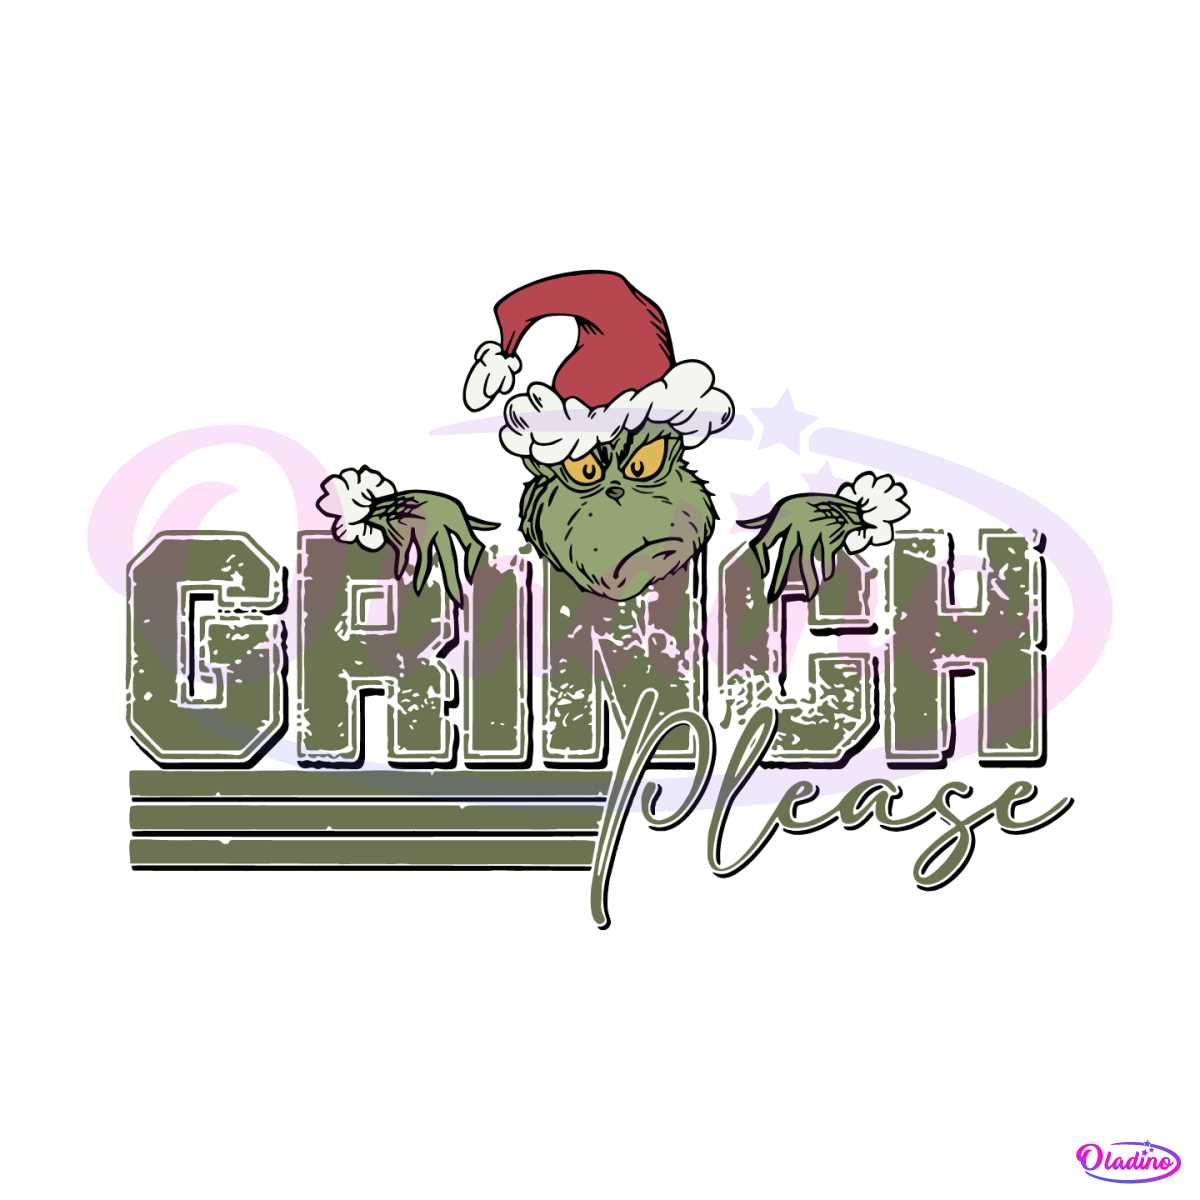 Embrace Holiday Whimsy with Our Enchanting Grinch SVG Collection🎄🎄🎄
oladino.com/product-tag/gr…
#Grinch #SVGfile